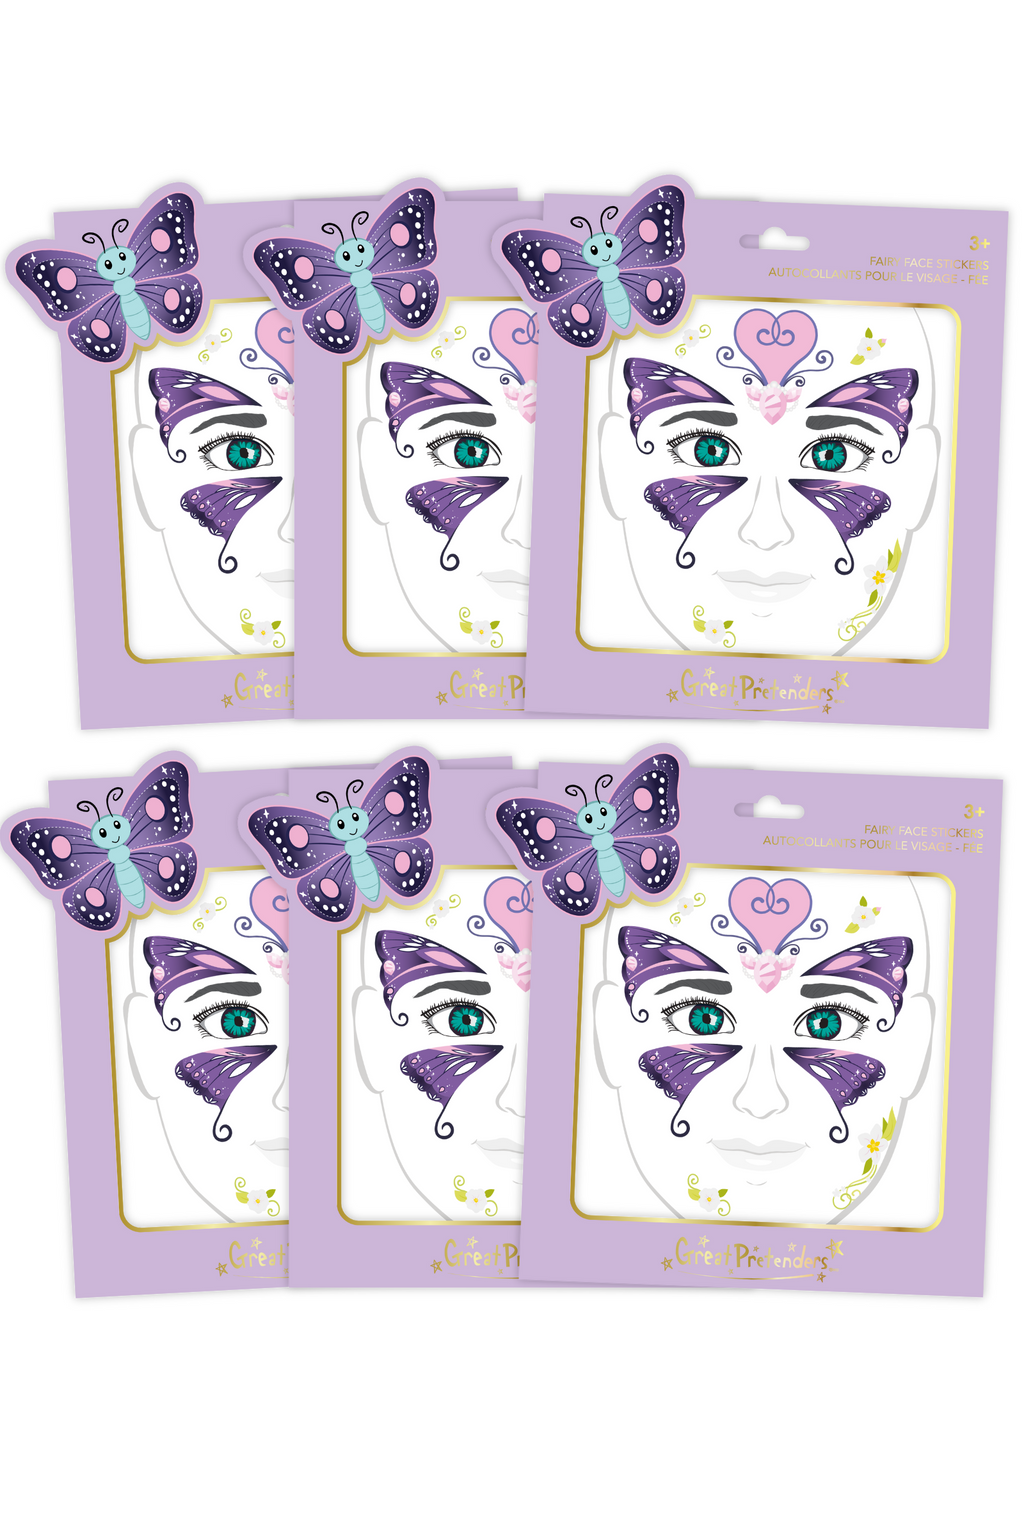 6 Packs of Unicorn Face Stickers